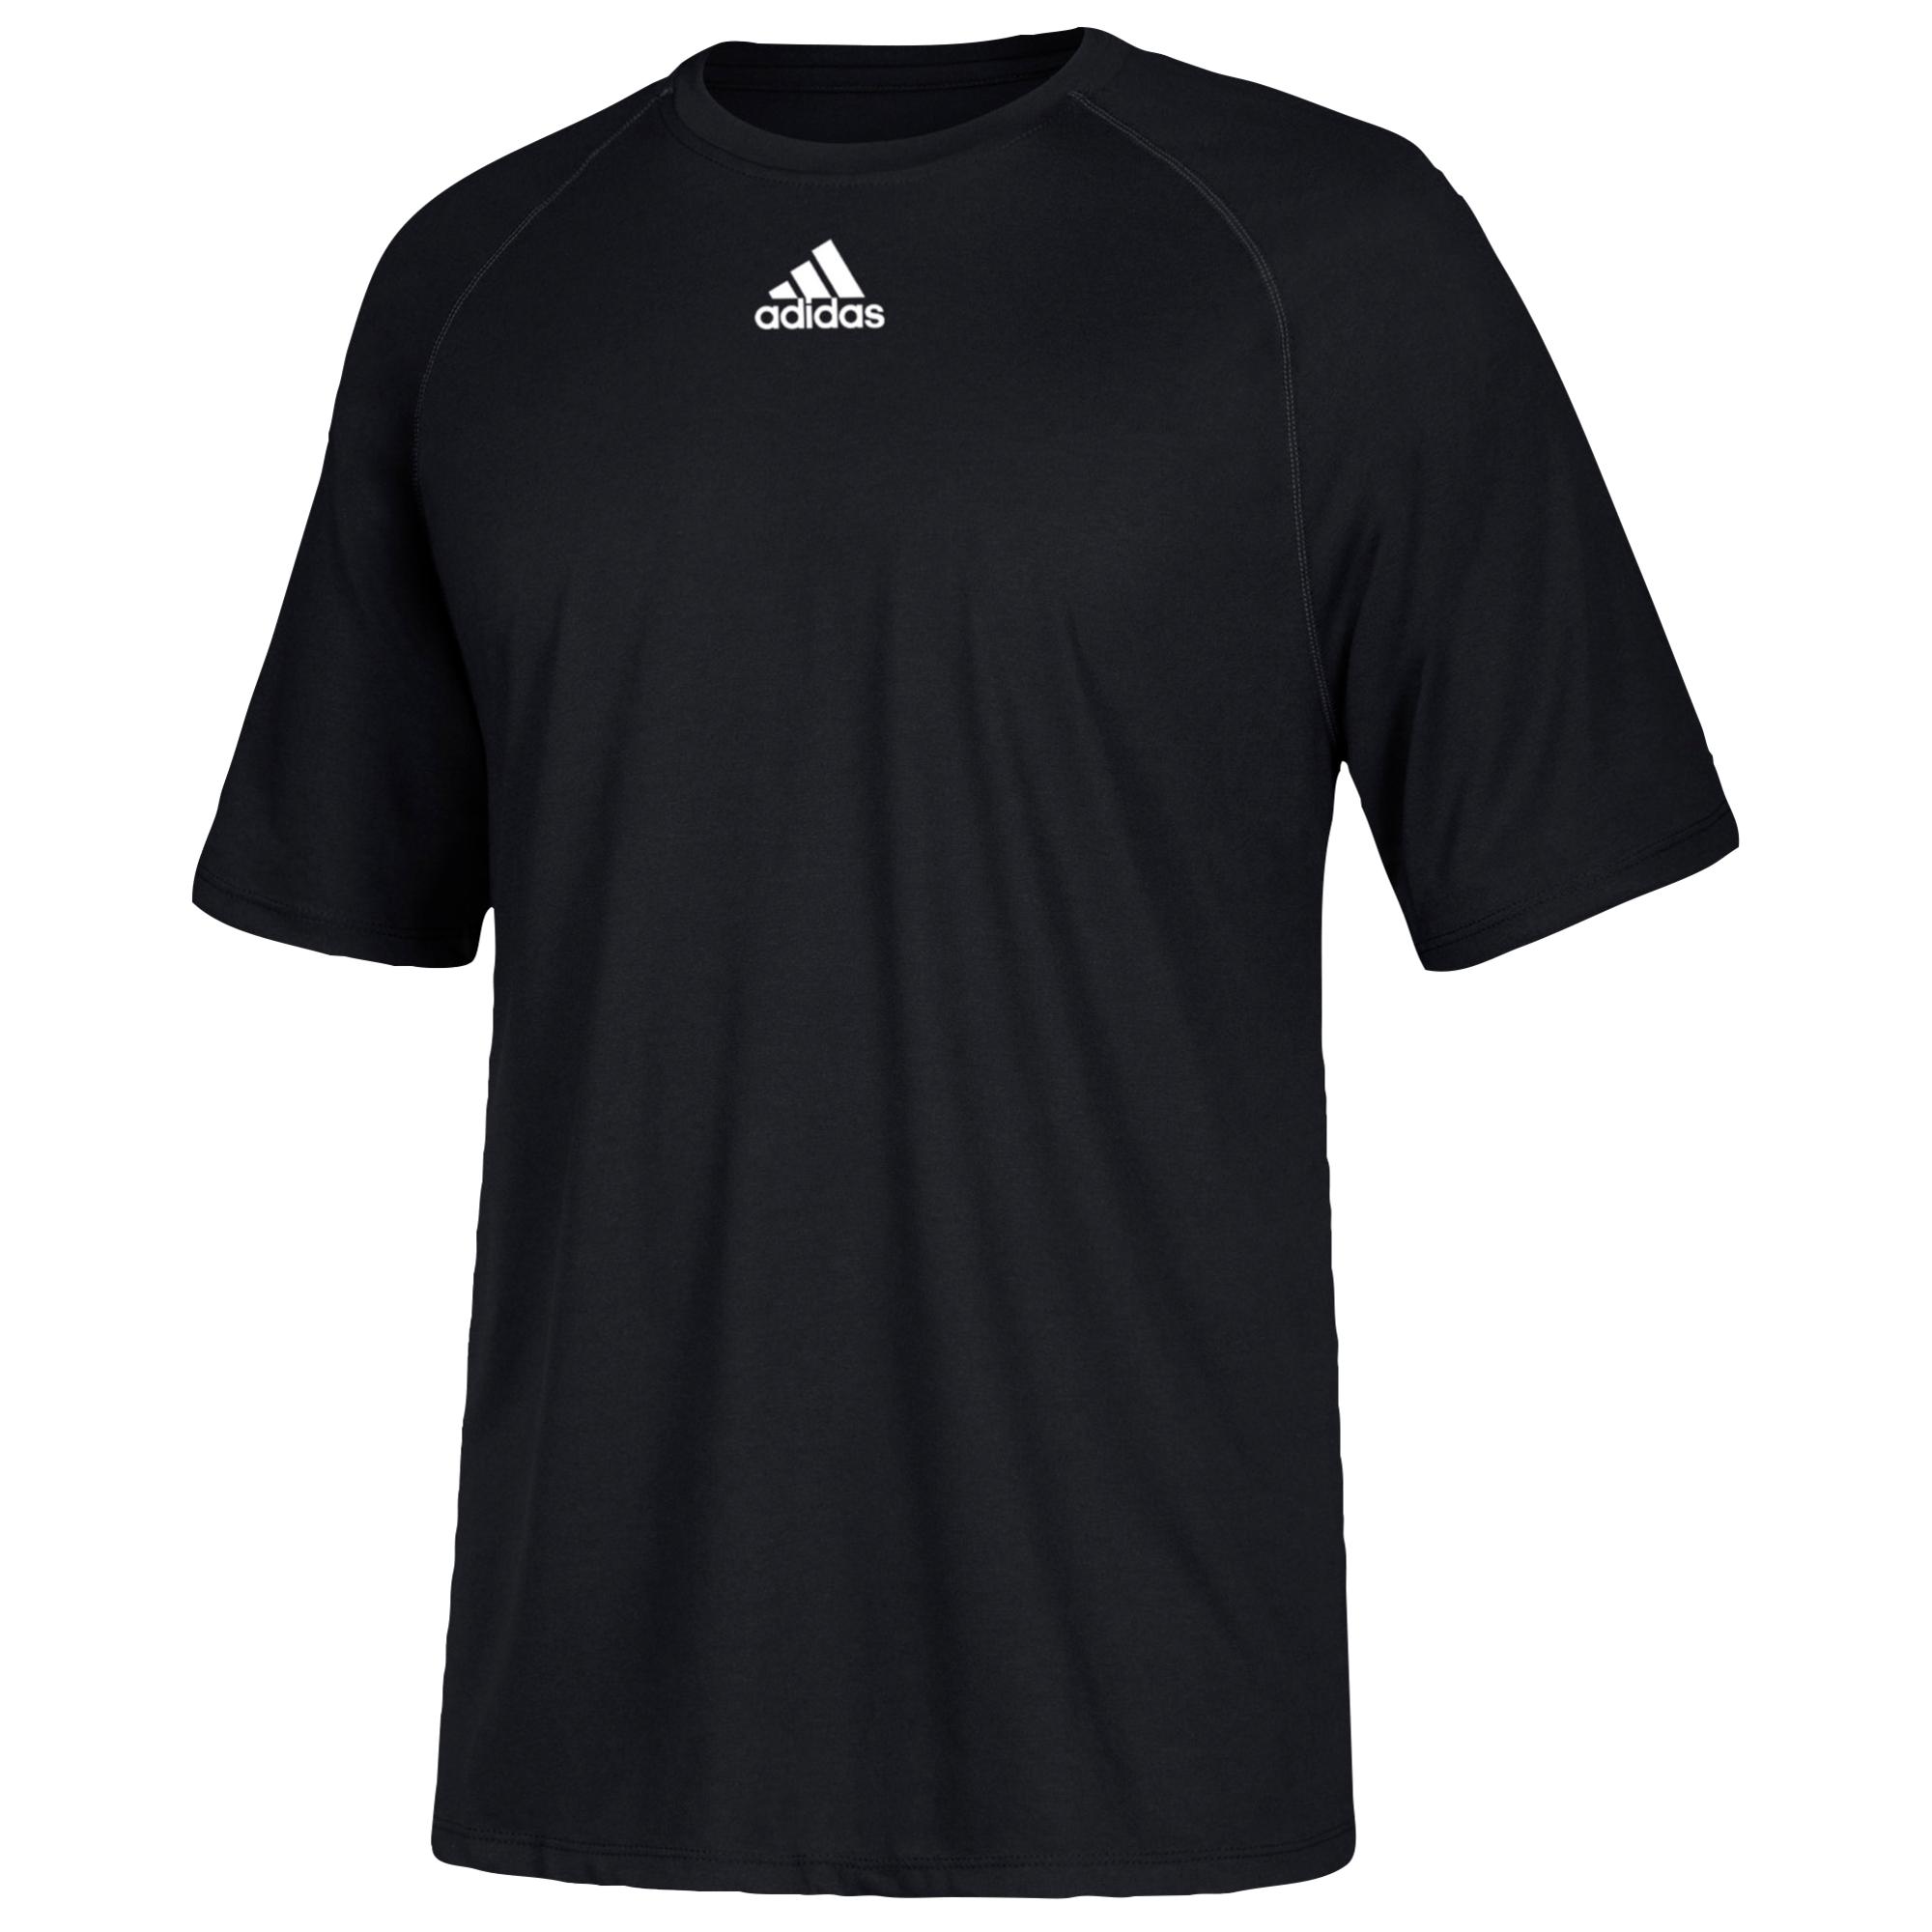 adidas Team Climalite Short Sleeve T-shirt in Black for Men - Lyst